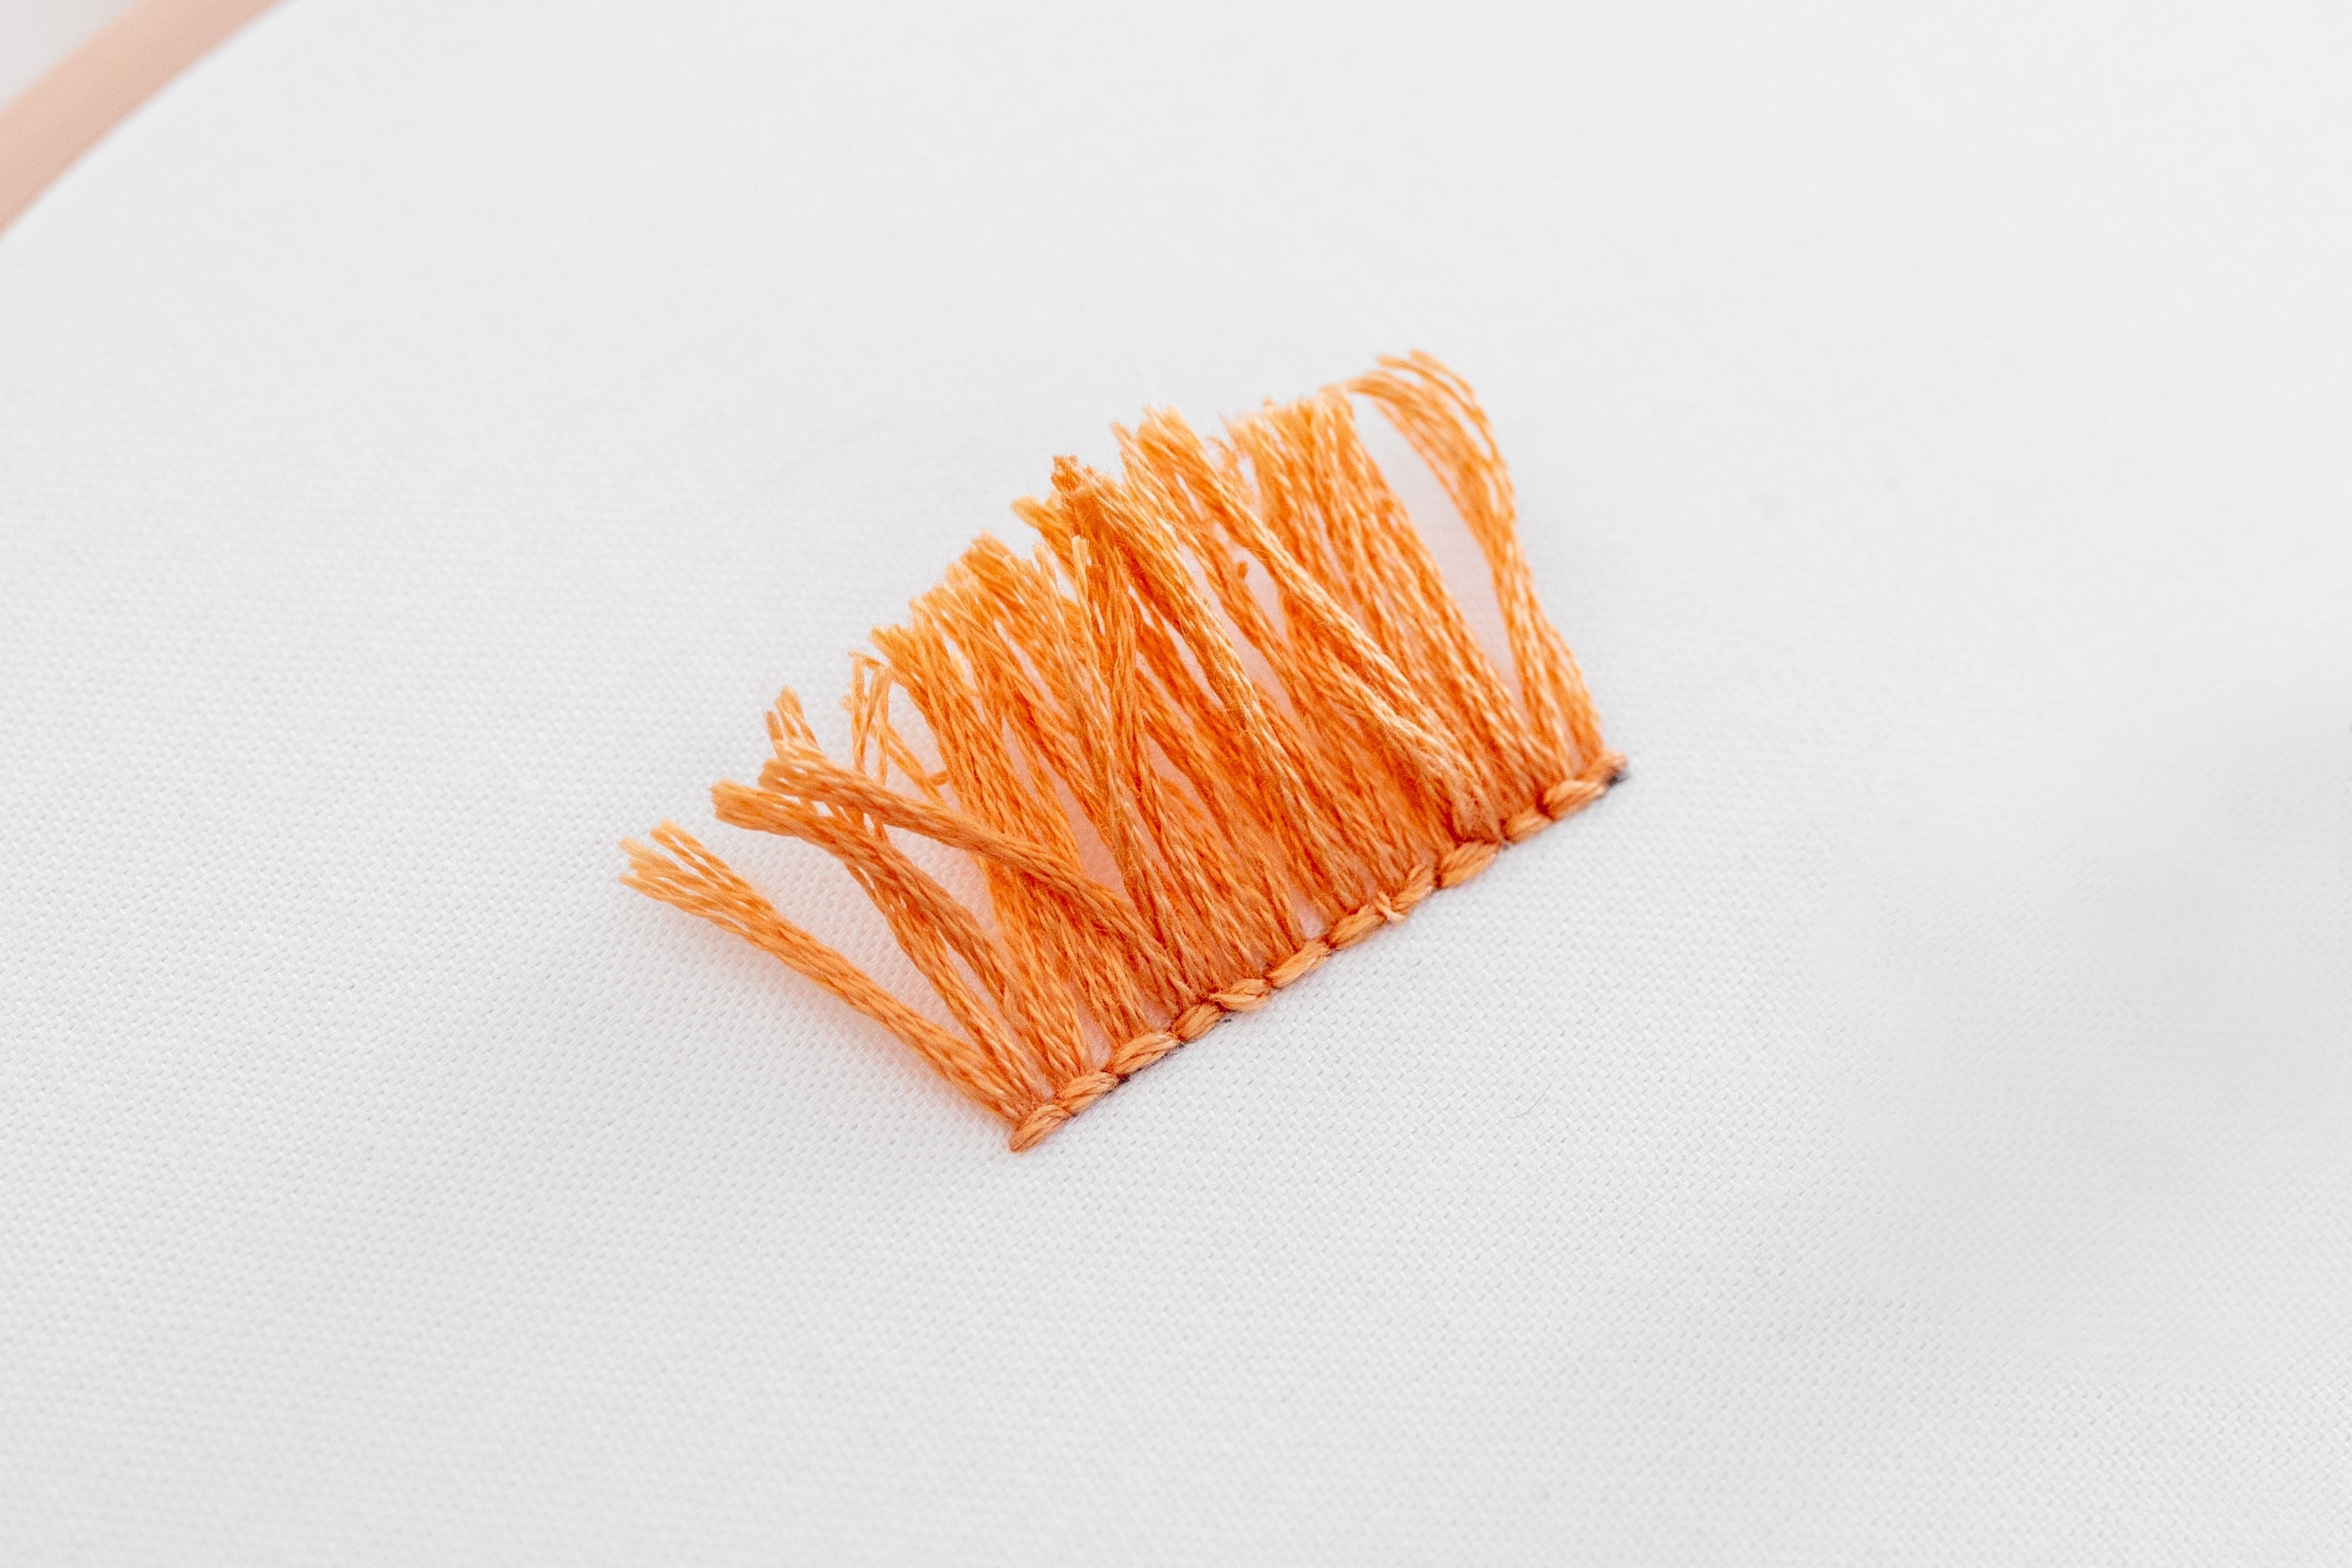 This is an image of a chopped turkey stitch.